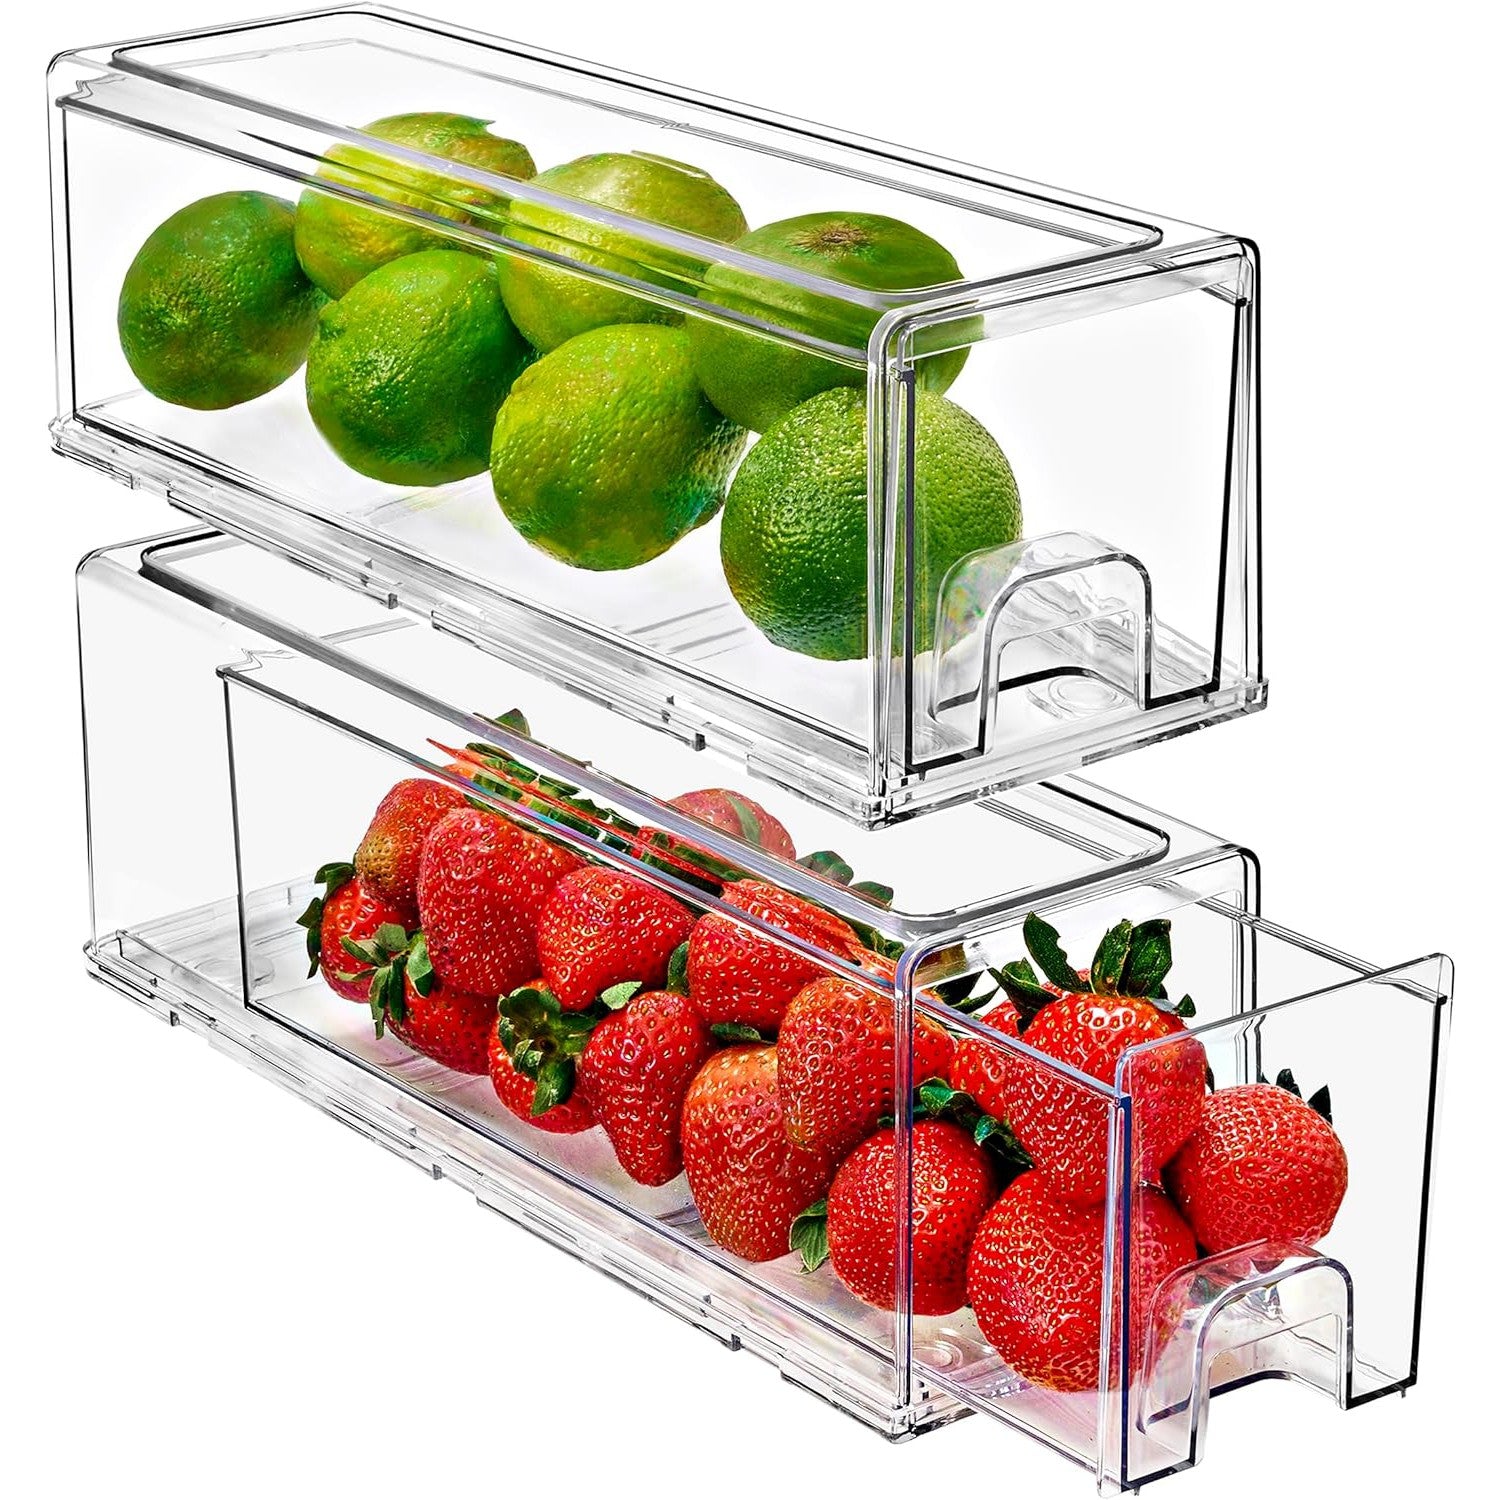 Sorbus Acrylic Pull Out Drawer Organizers